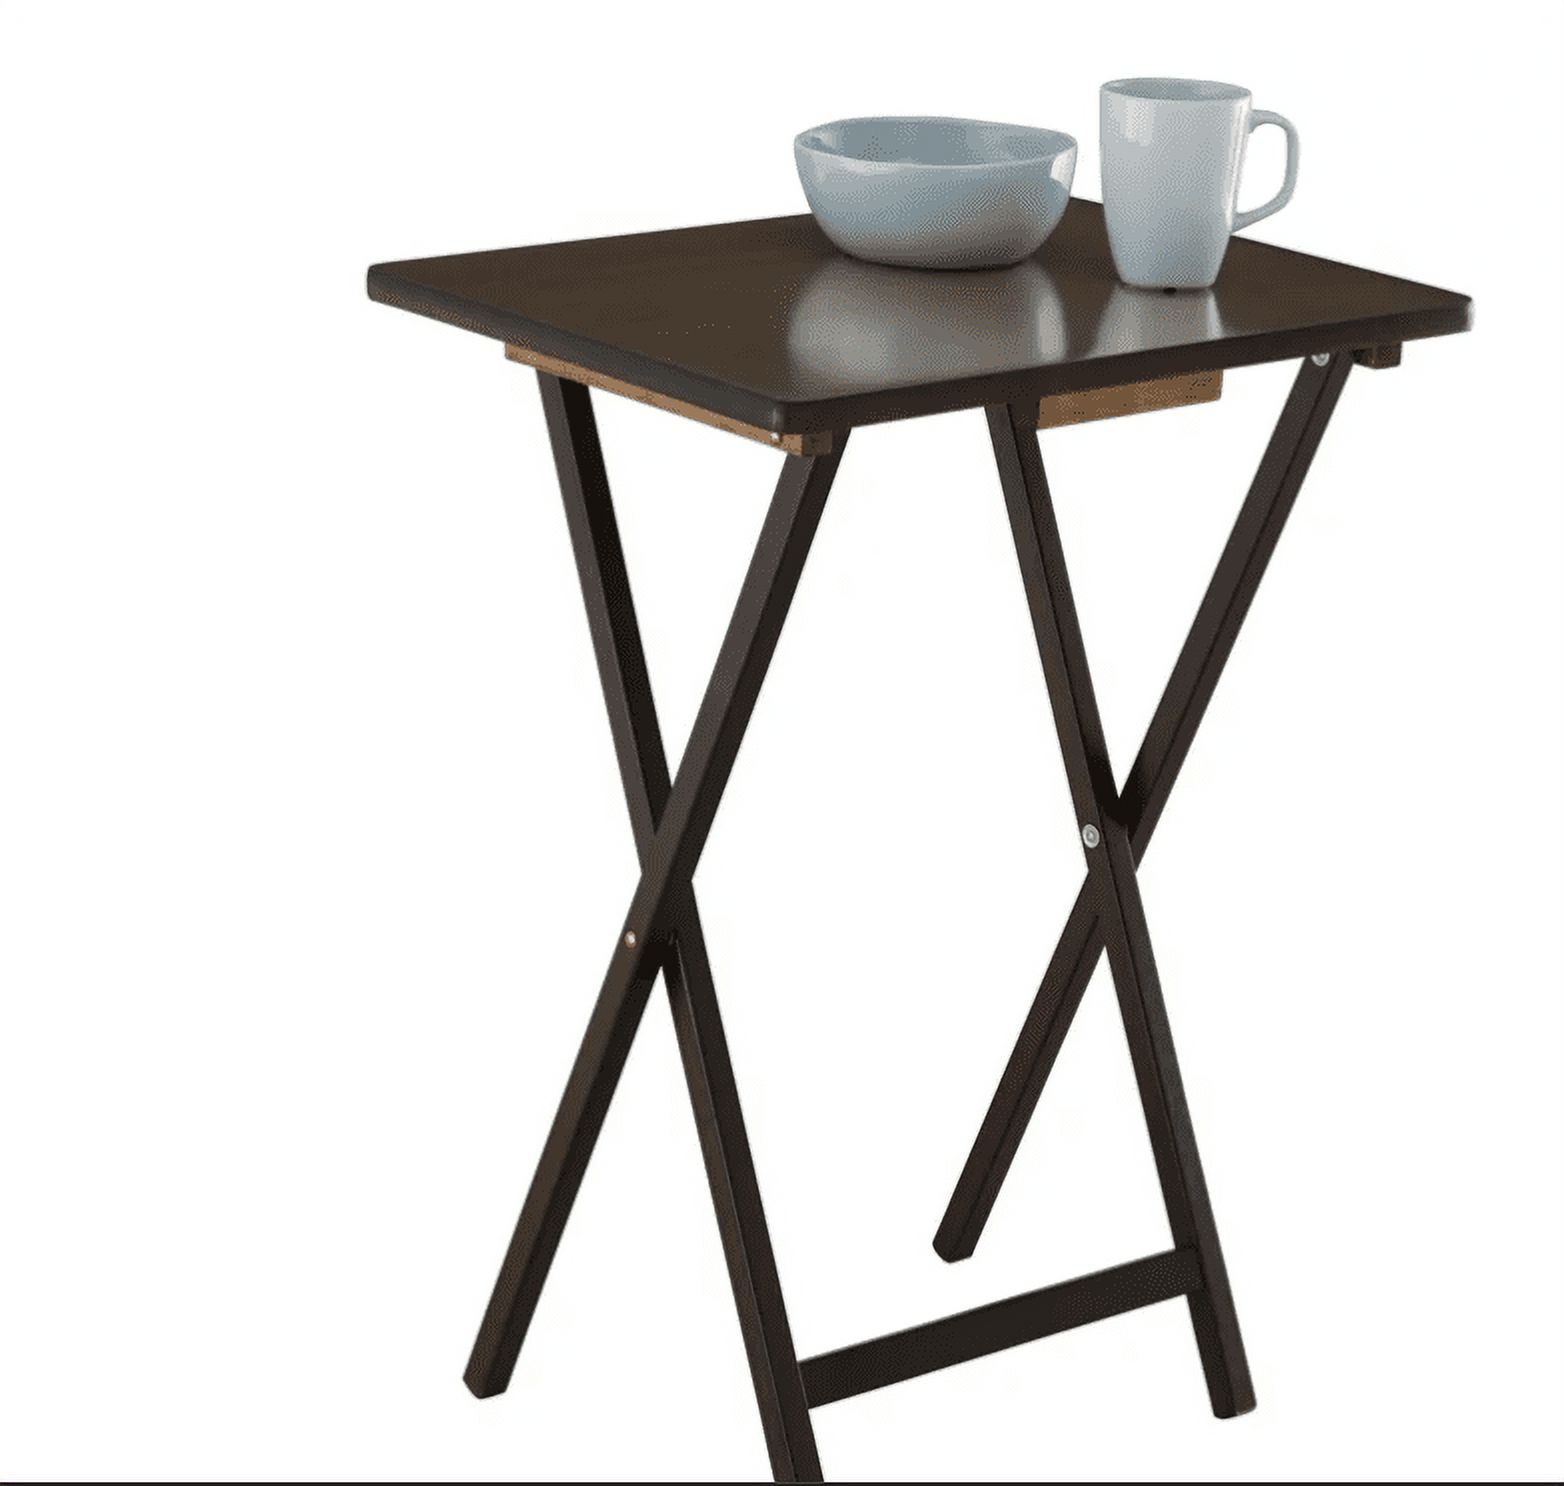 Mainstays Indoor Folding Table Set of 4 in Walnut L19 x W15 x H26 inches. 4 Tables+1 Rack Stand. - image 4 of 5